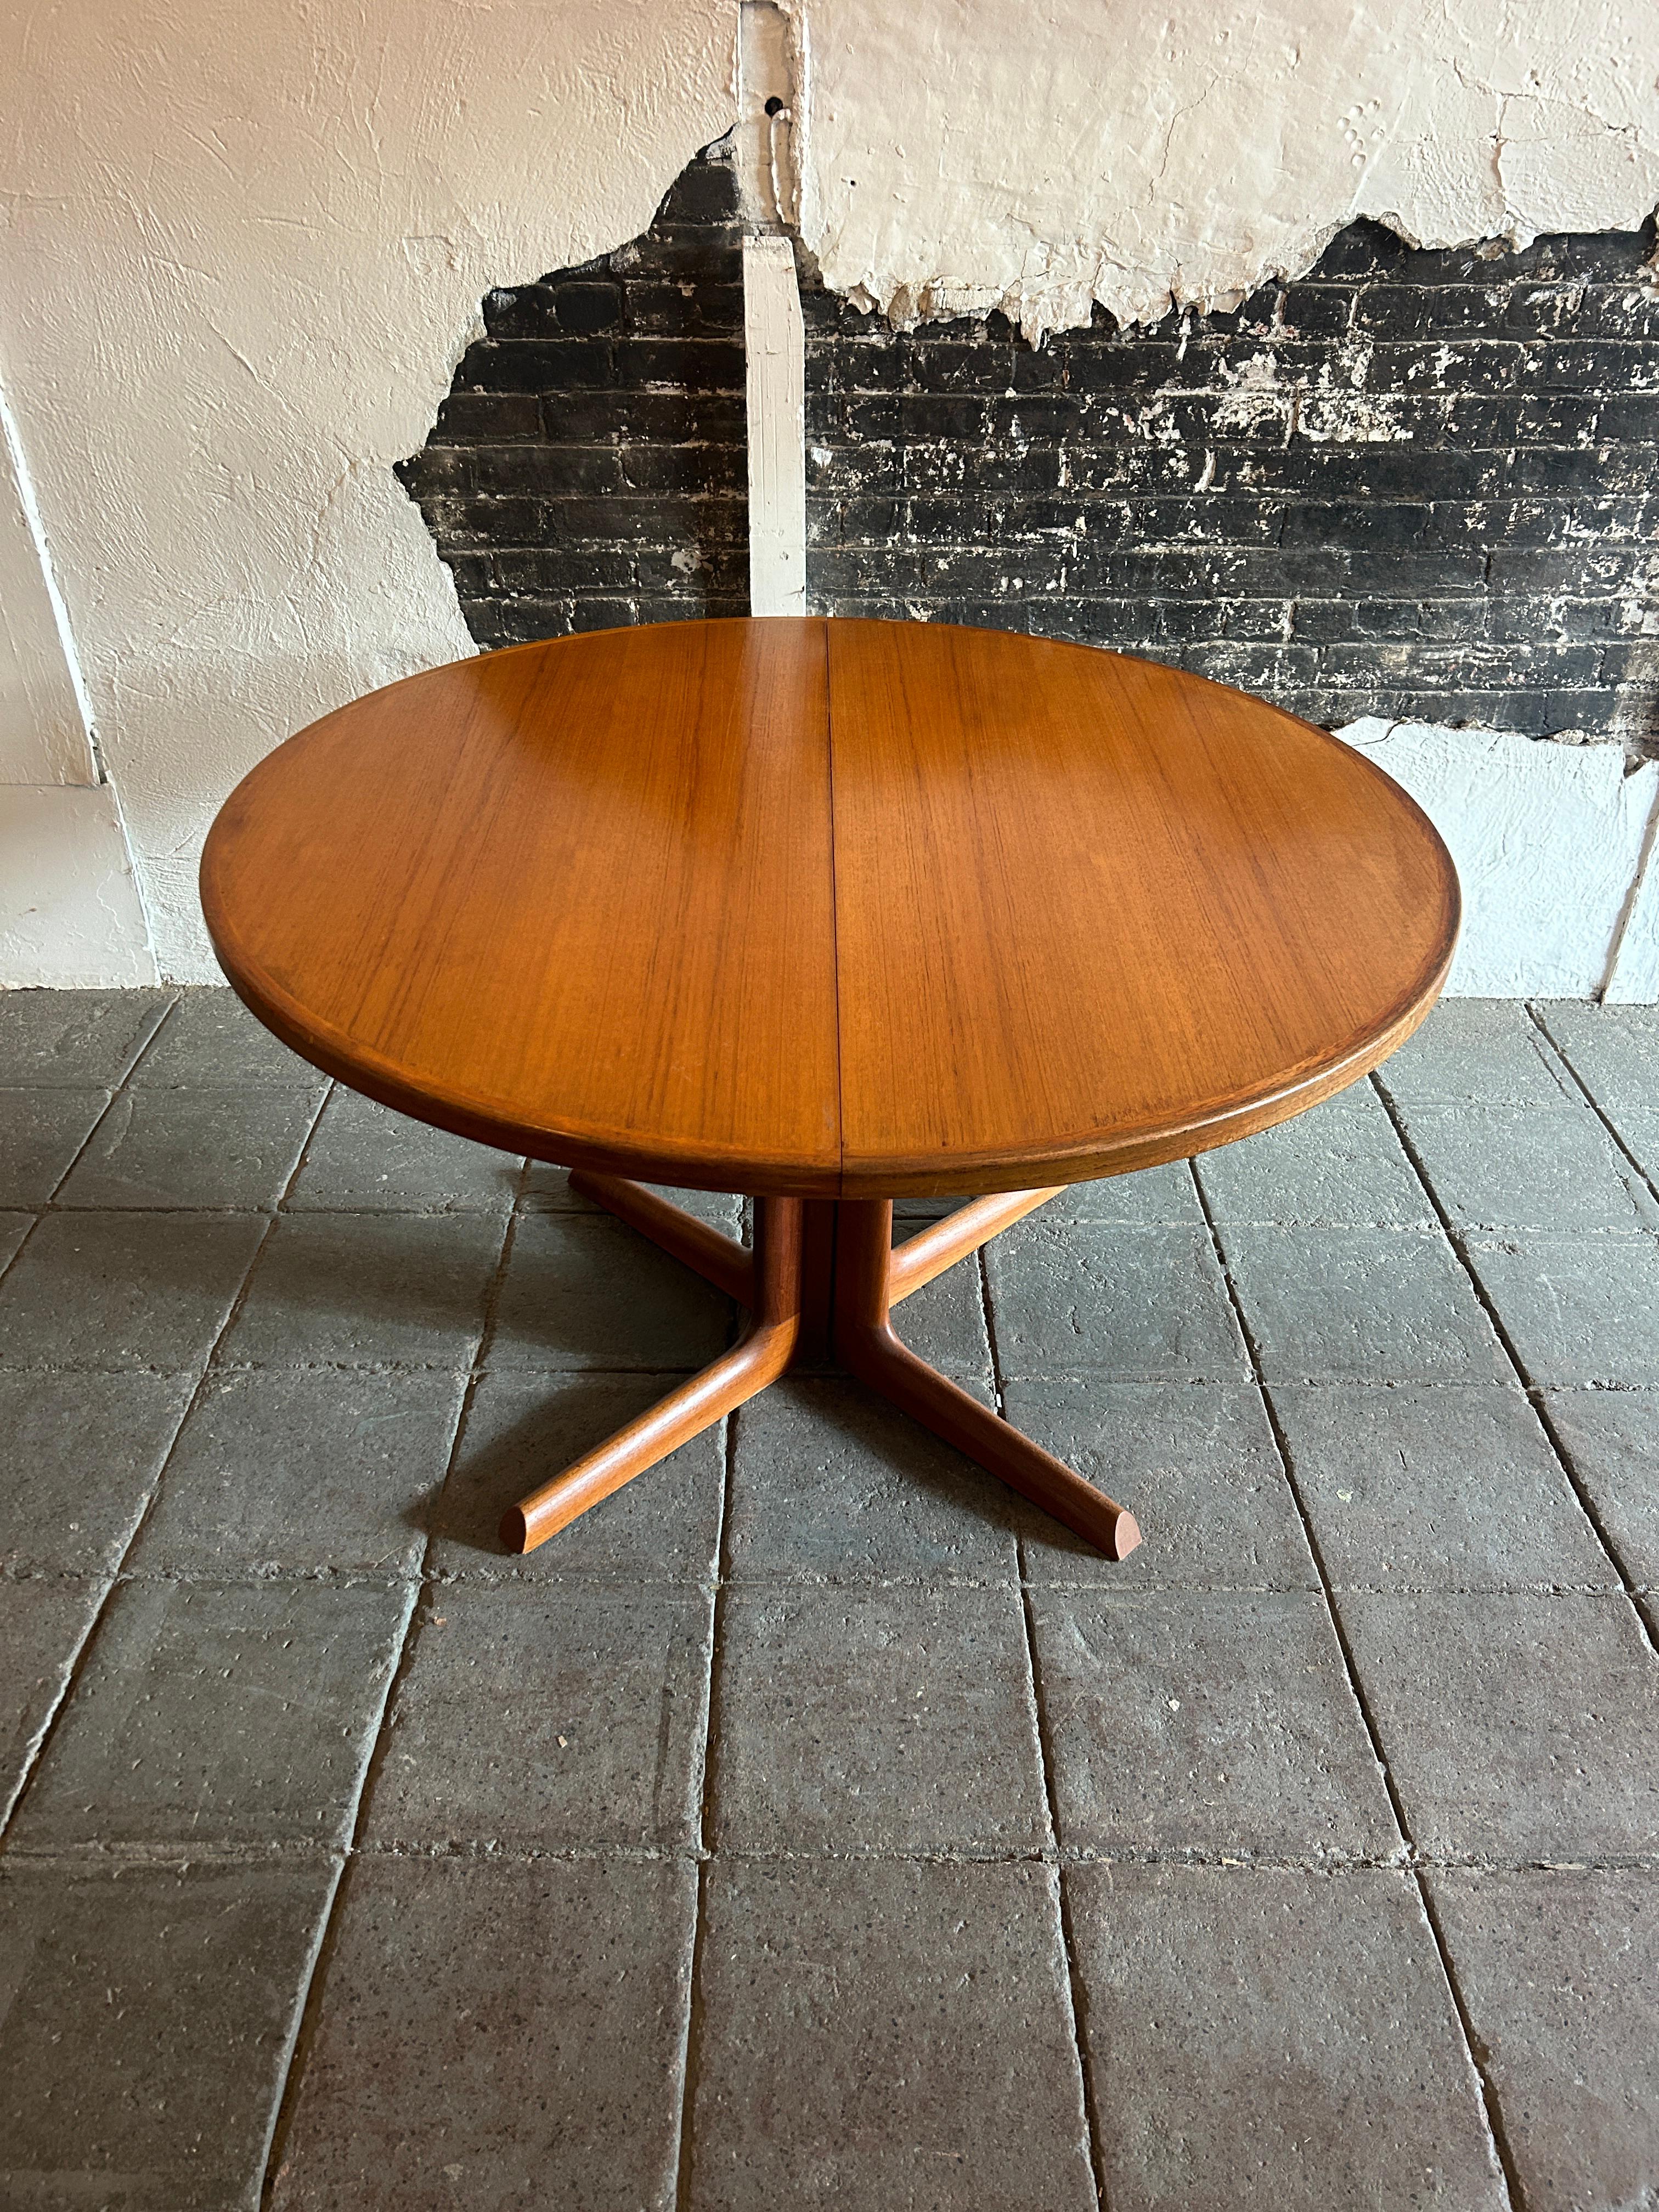 Stunning mid century Teak Round Danish Modern extension dining table with (2) leaves. This table has beautiful Teak Veneer top with Solid Teak ends and legs. This table is in beautiful condition with light golden brown black teak wood tones very